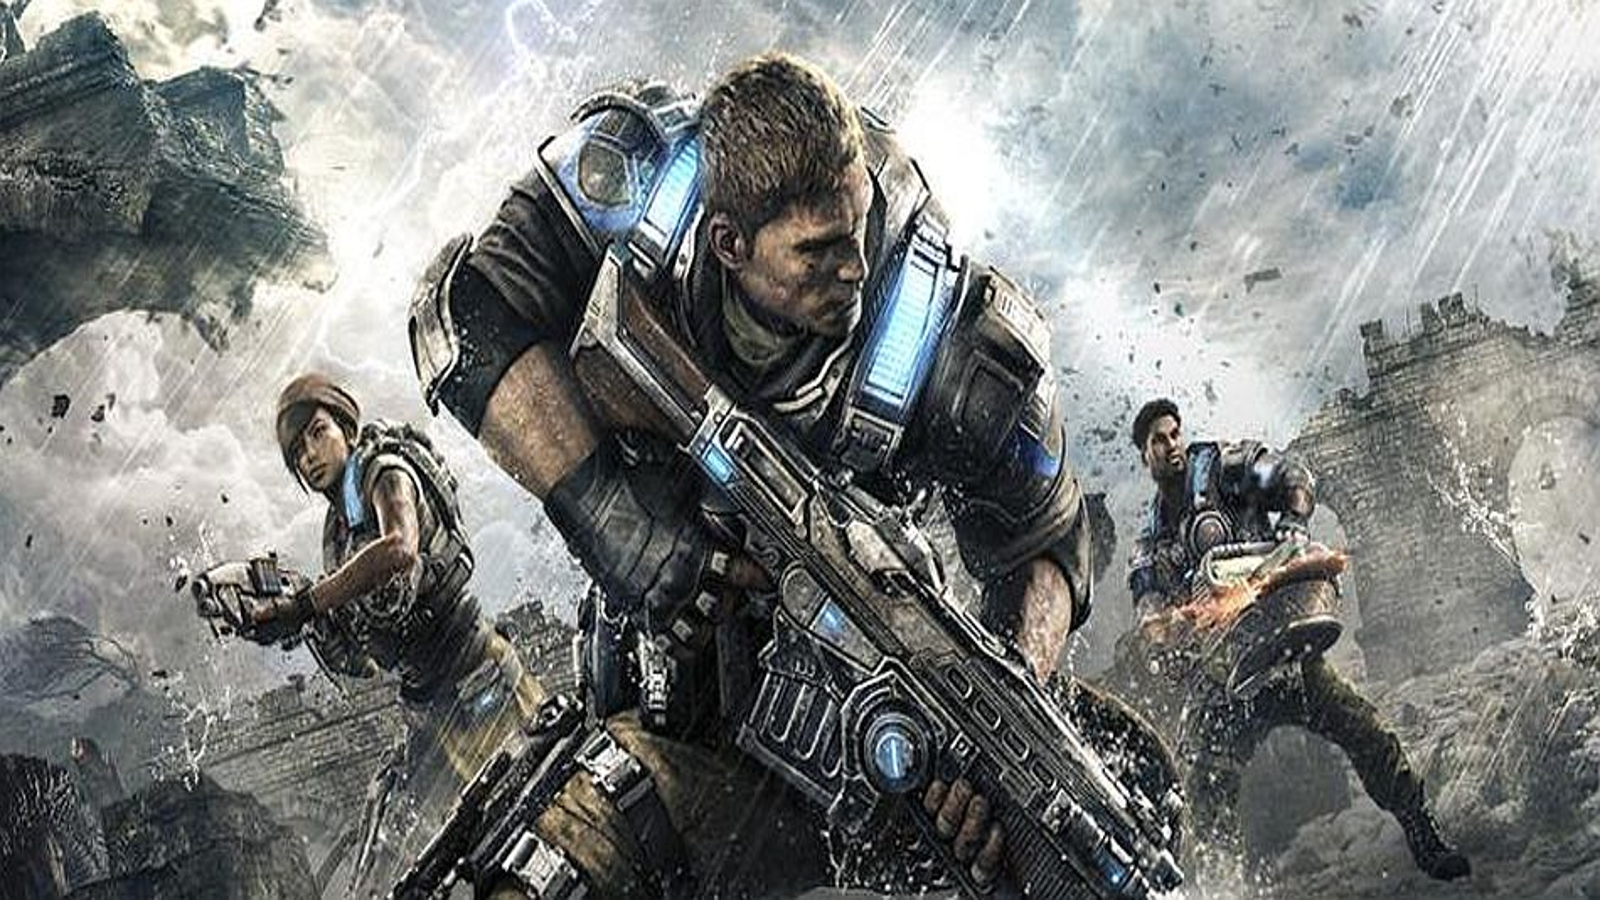 Digital Foundry: Hands-on with Gears of War 4's multiplayer beta